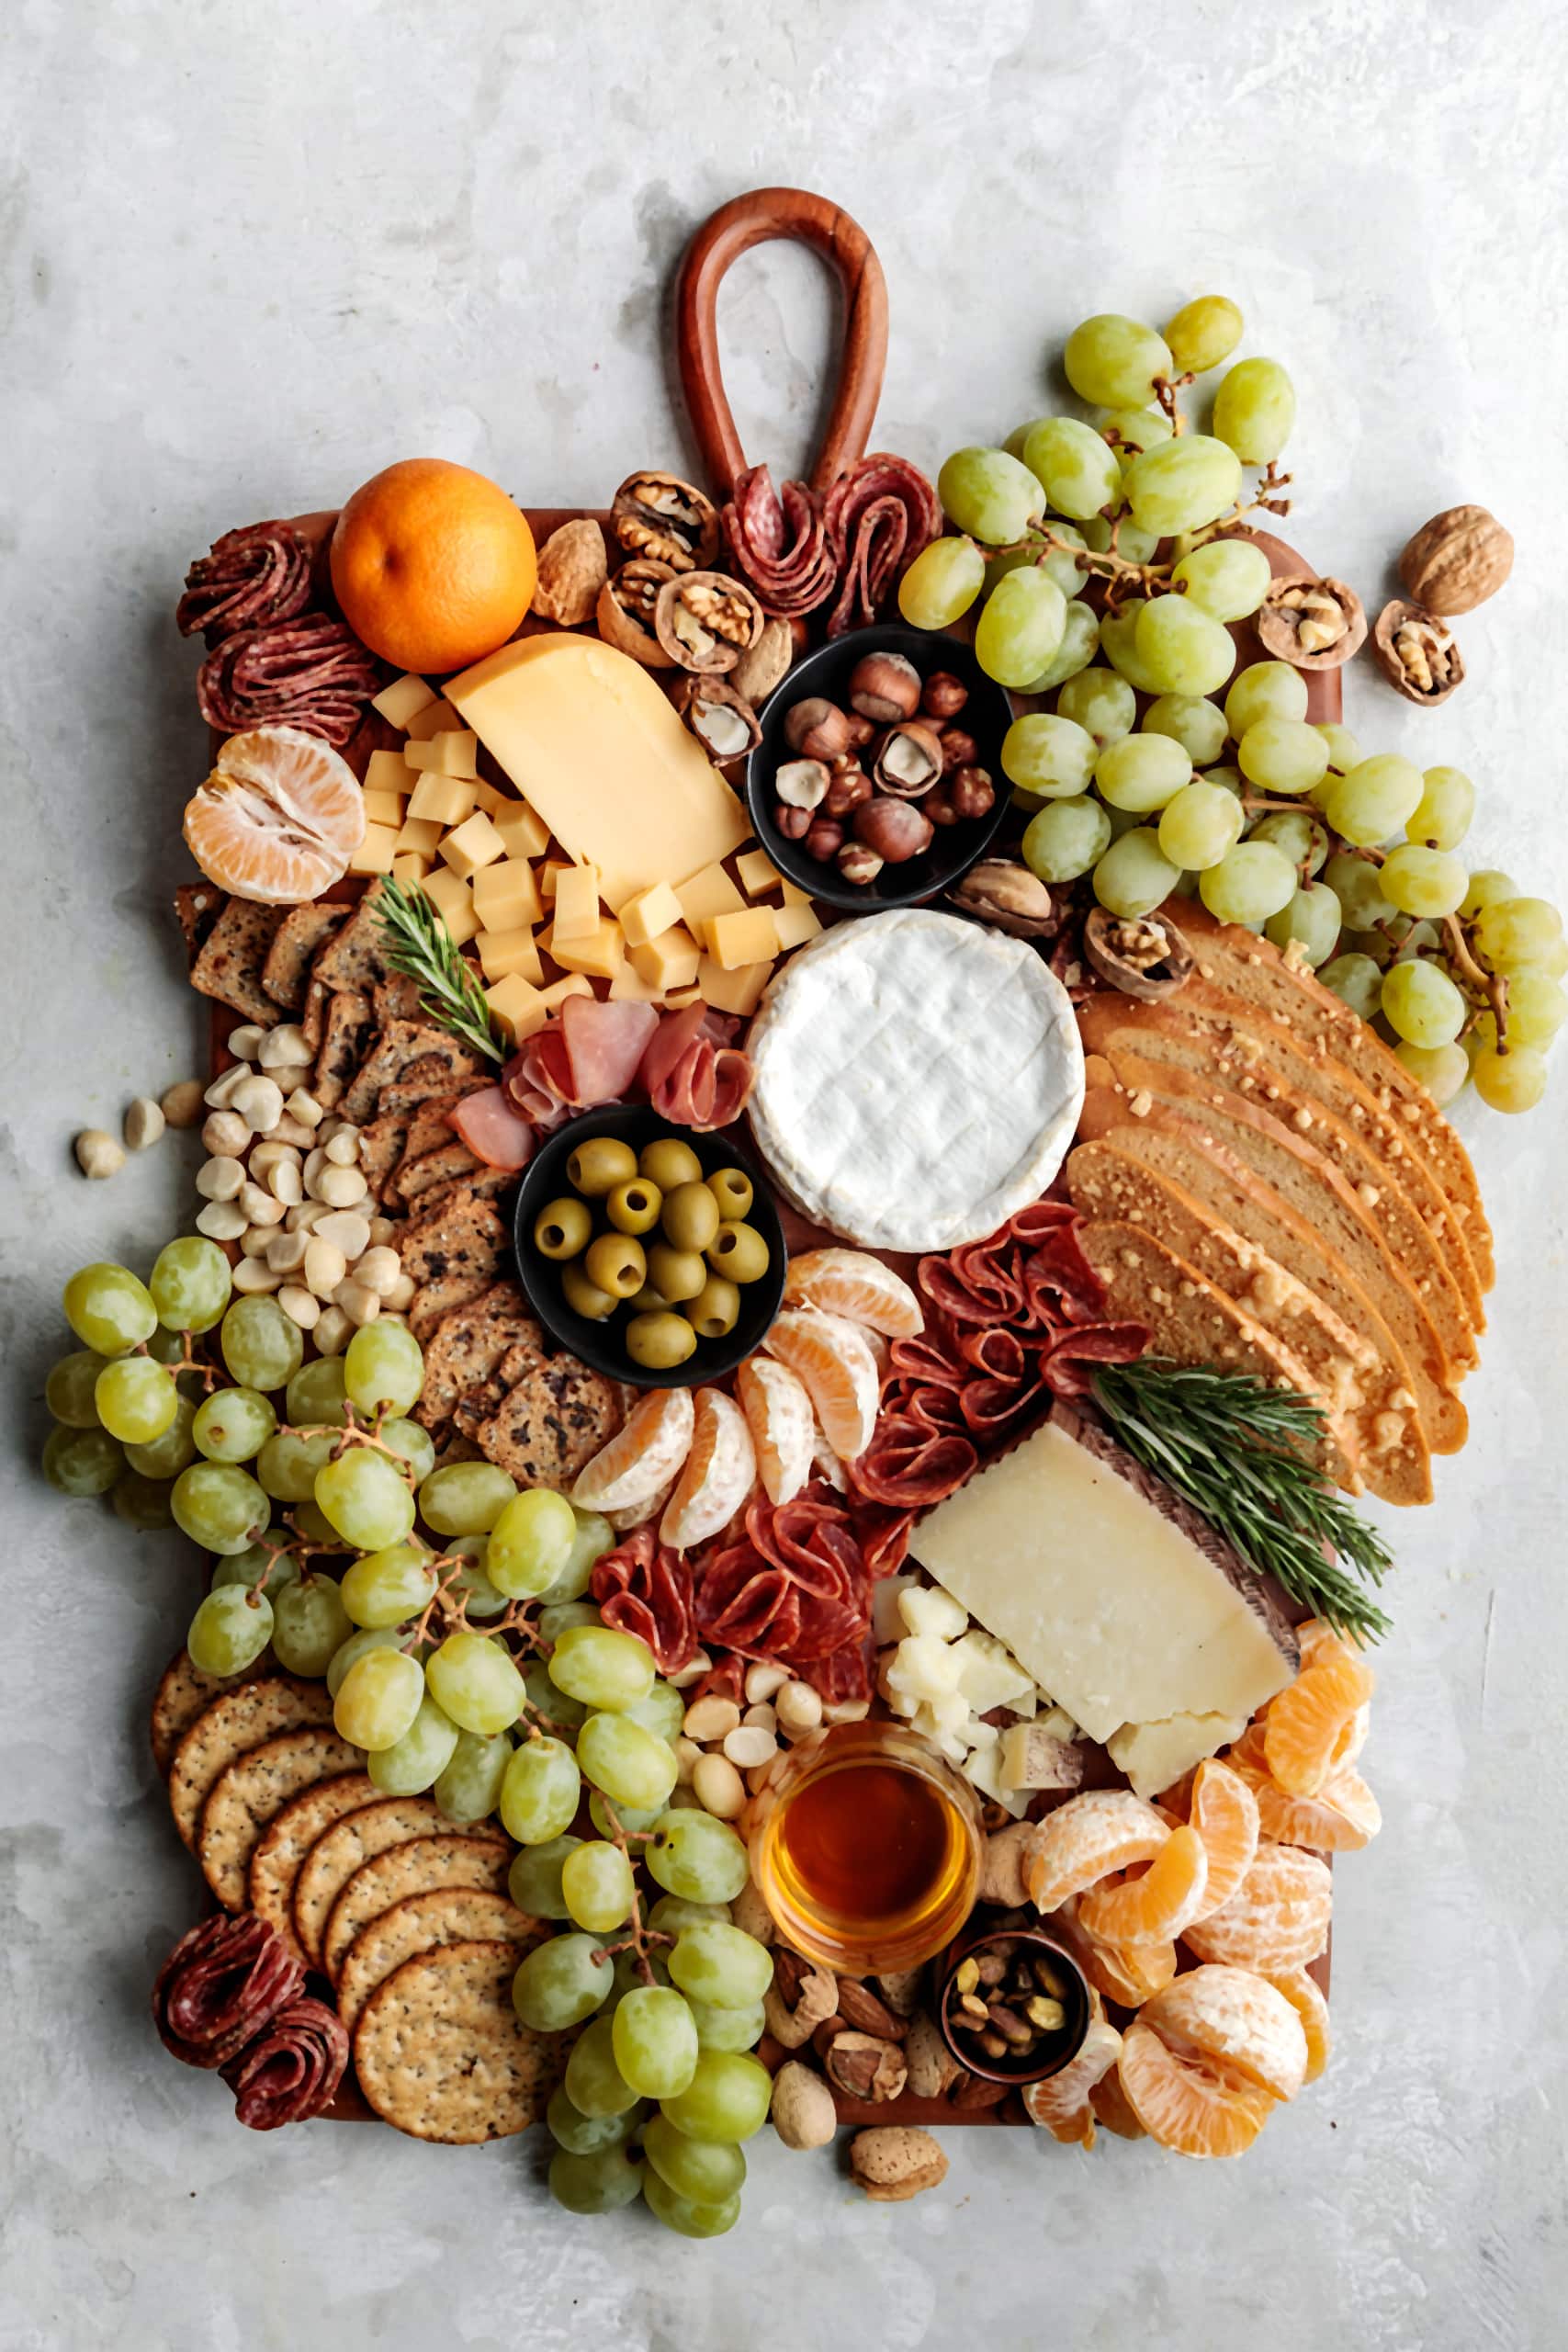 How to build an easy and impressive Winter Cheese Board featuring seasonal fruits, nuts, olives and a variety of cheese and charcuterie.